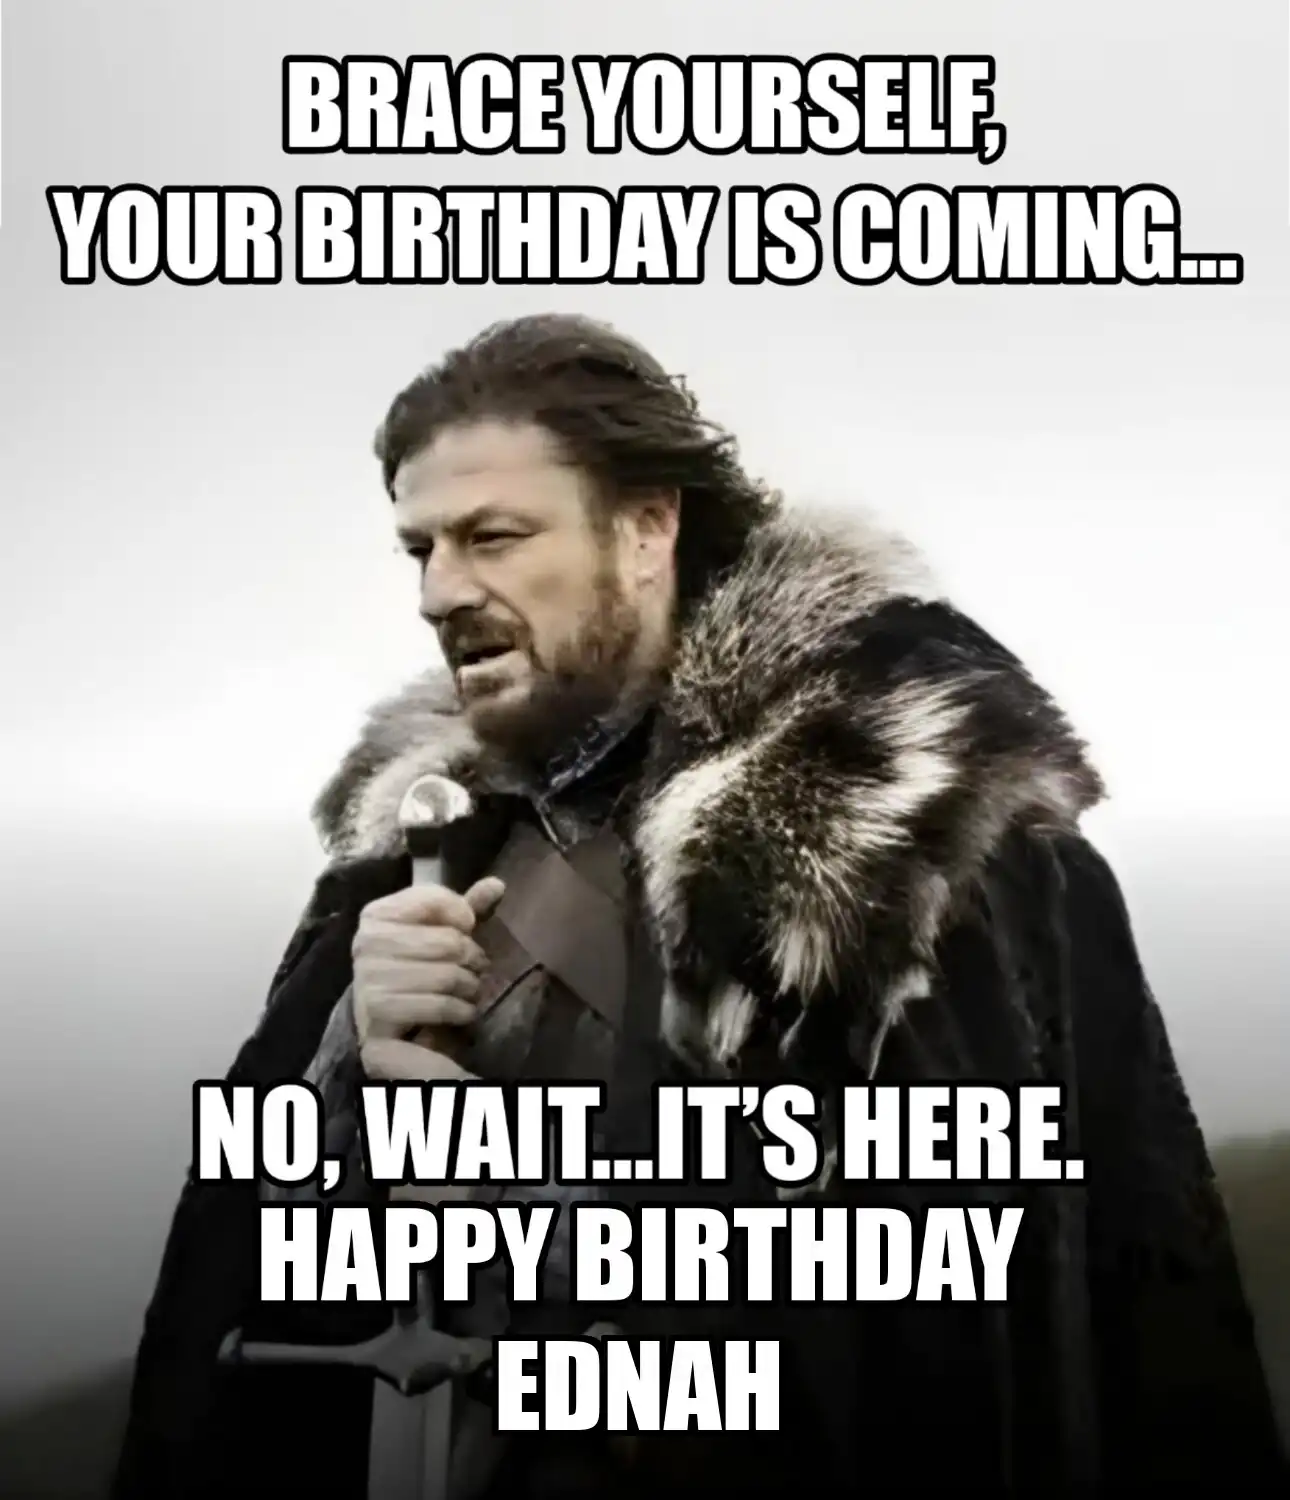 Happy Birthday Ednah Brace Yourself Your Birthday Is Coming Meme